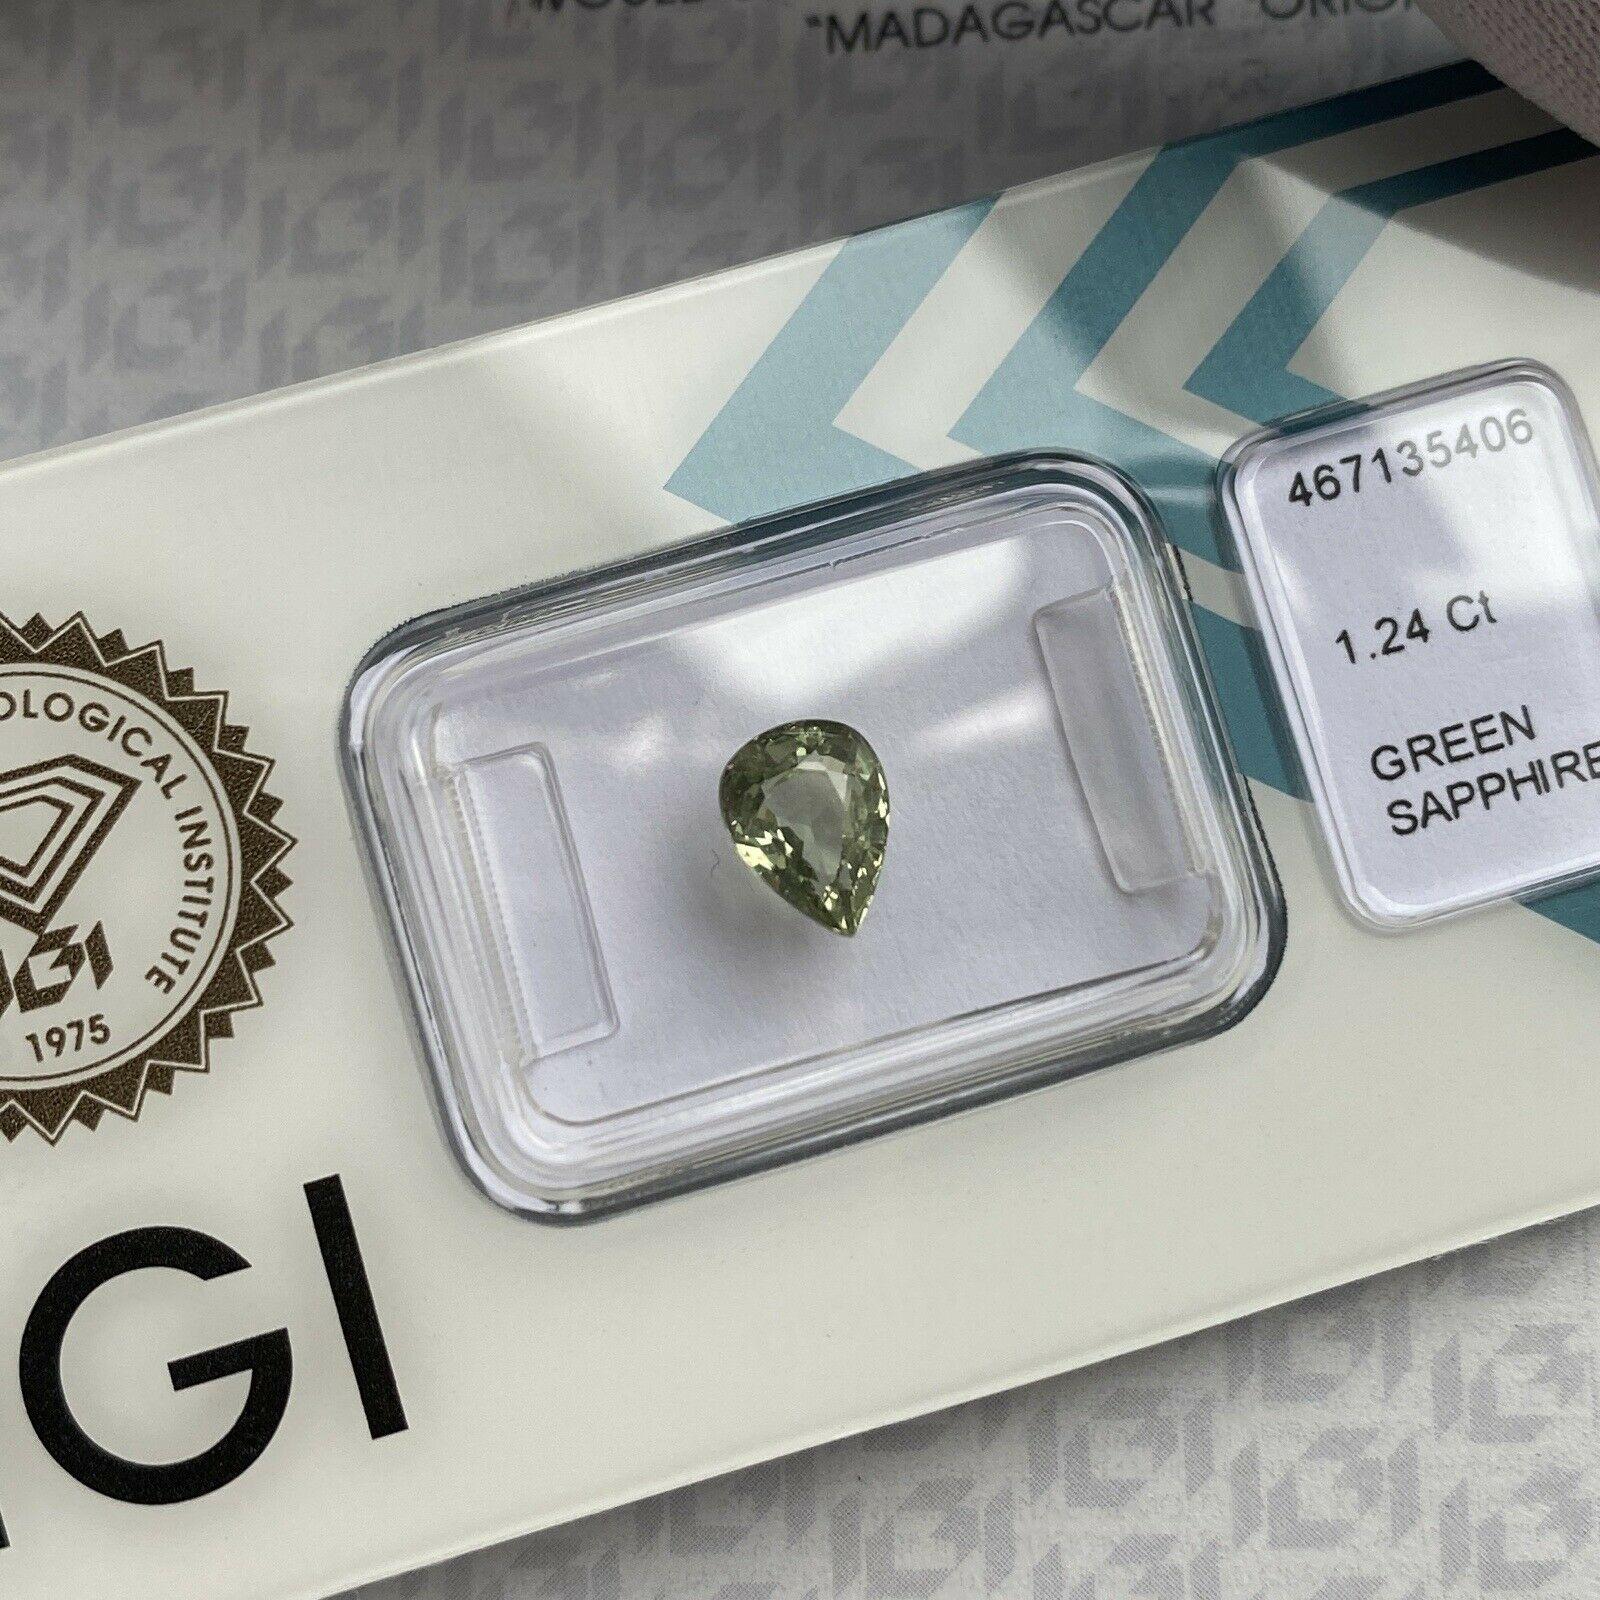 1.24ct Bright Yellow Green Untreated Sapphire Pear Teardrop Cut IGI Certified

Bright Yellow Green Sapphire In IGI Blister. 
1.24 Carat with an excellent pear teardrop cut and very good clarity, a very clean stone with only some small natural